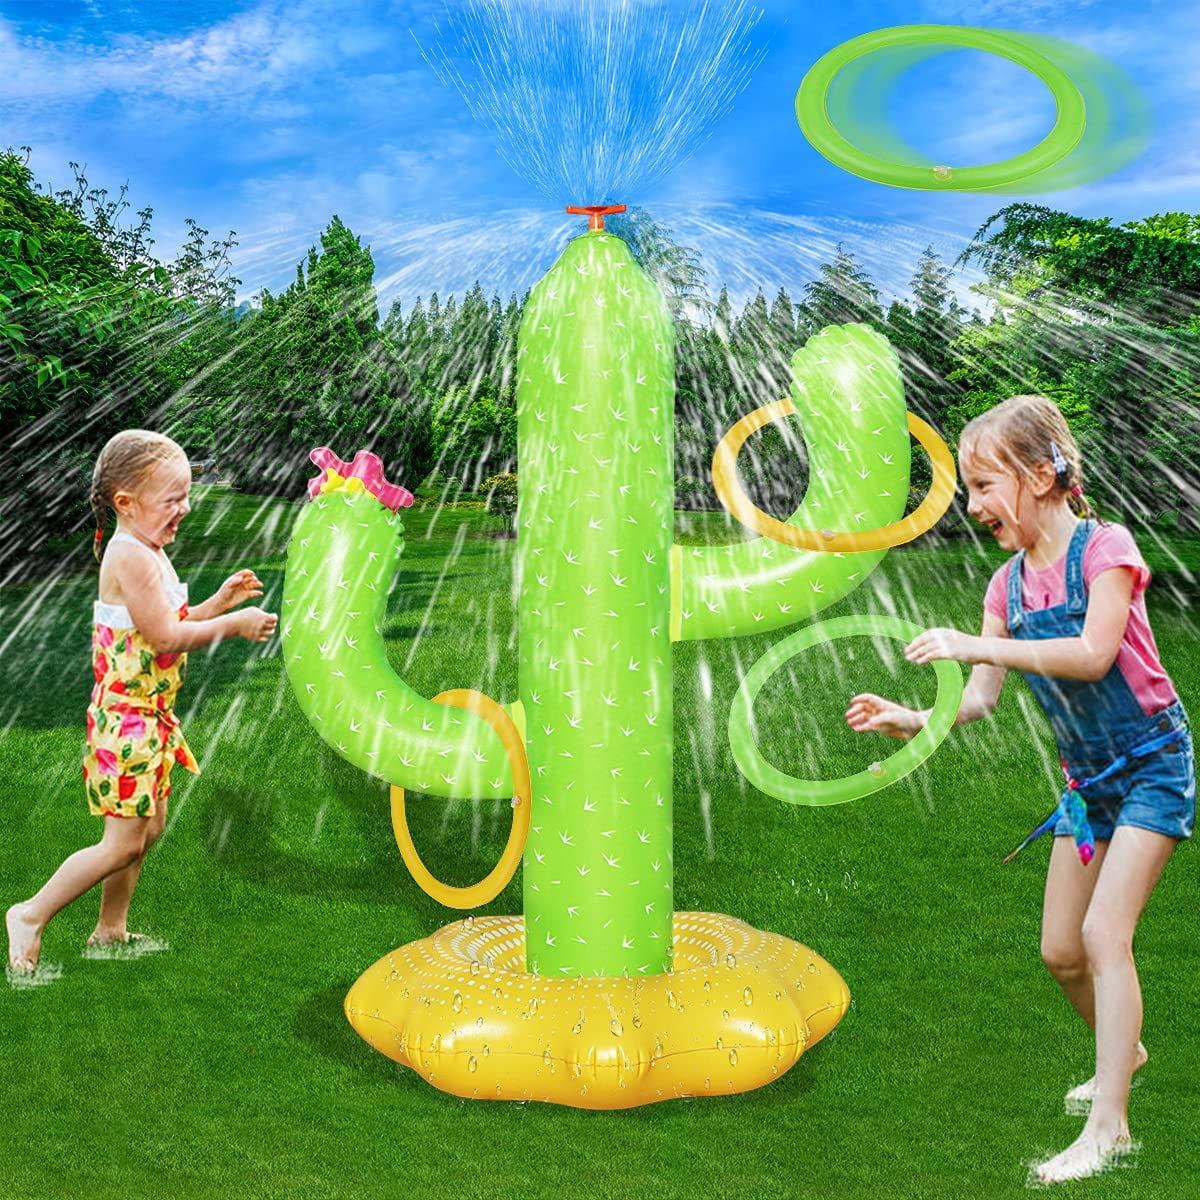 Summer Girls, Spray Gifts Children with Outdoor Toys Cactus Cactus Toy Game U Fun Backyard for Sprinkler Sprinkler Inflatable Kids, Rings, for 3 5 for 4 Water Boys Years Ages and 6 4 Water